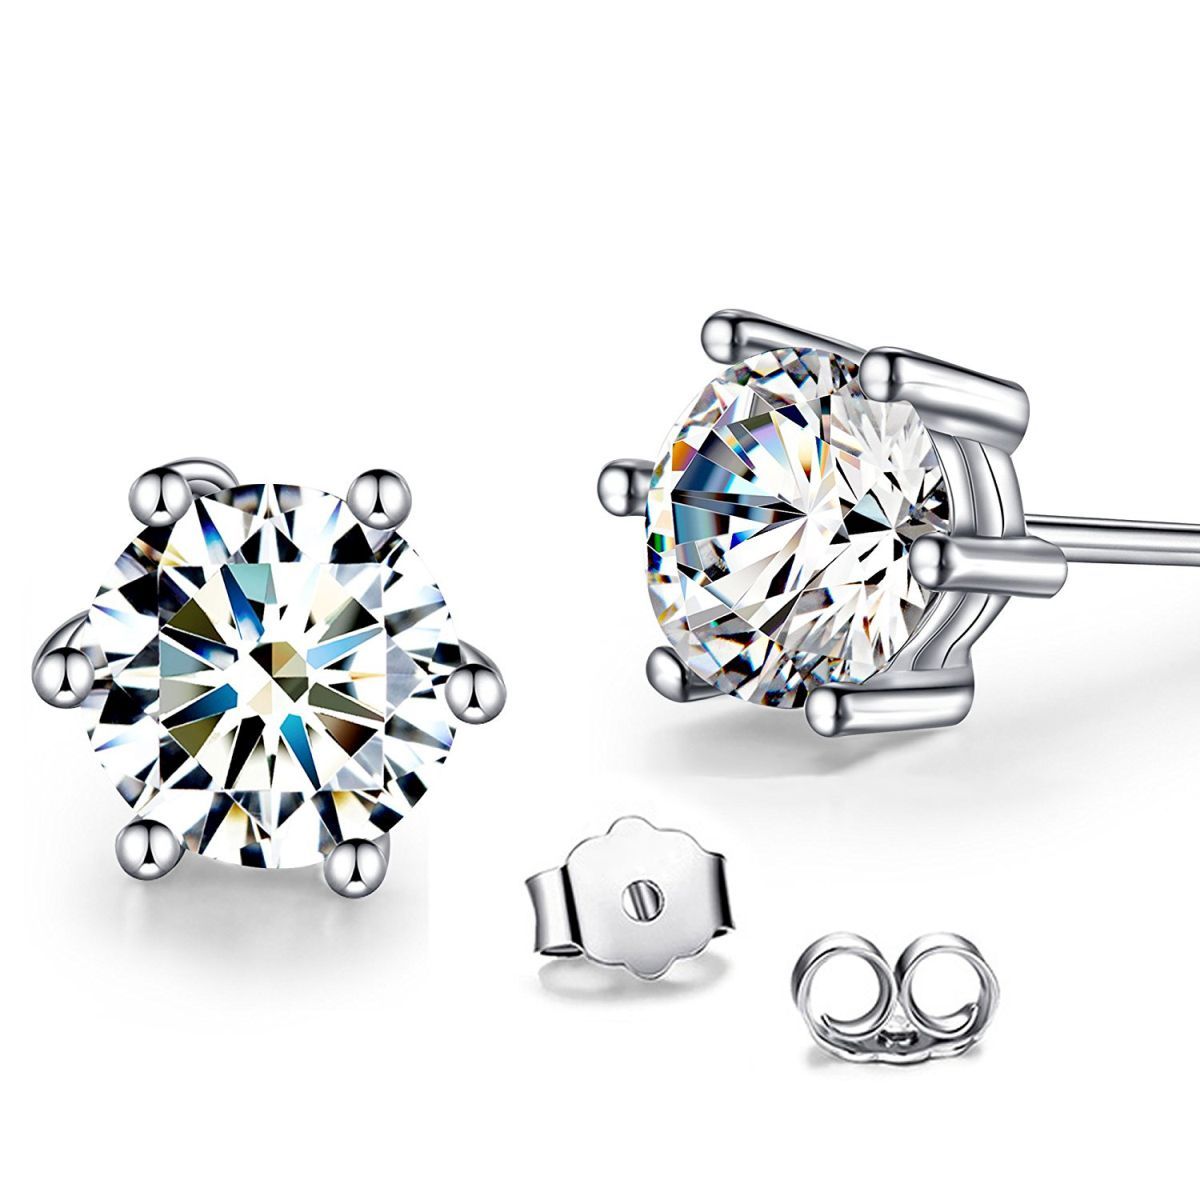 Solitaire 6 Mm Round Cut Cz Stainless Steel Ear Stud Pair Earring